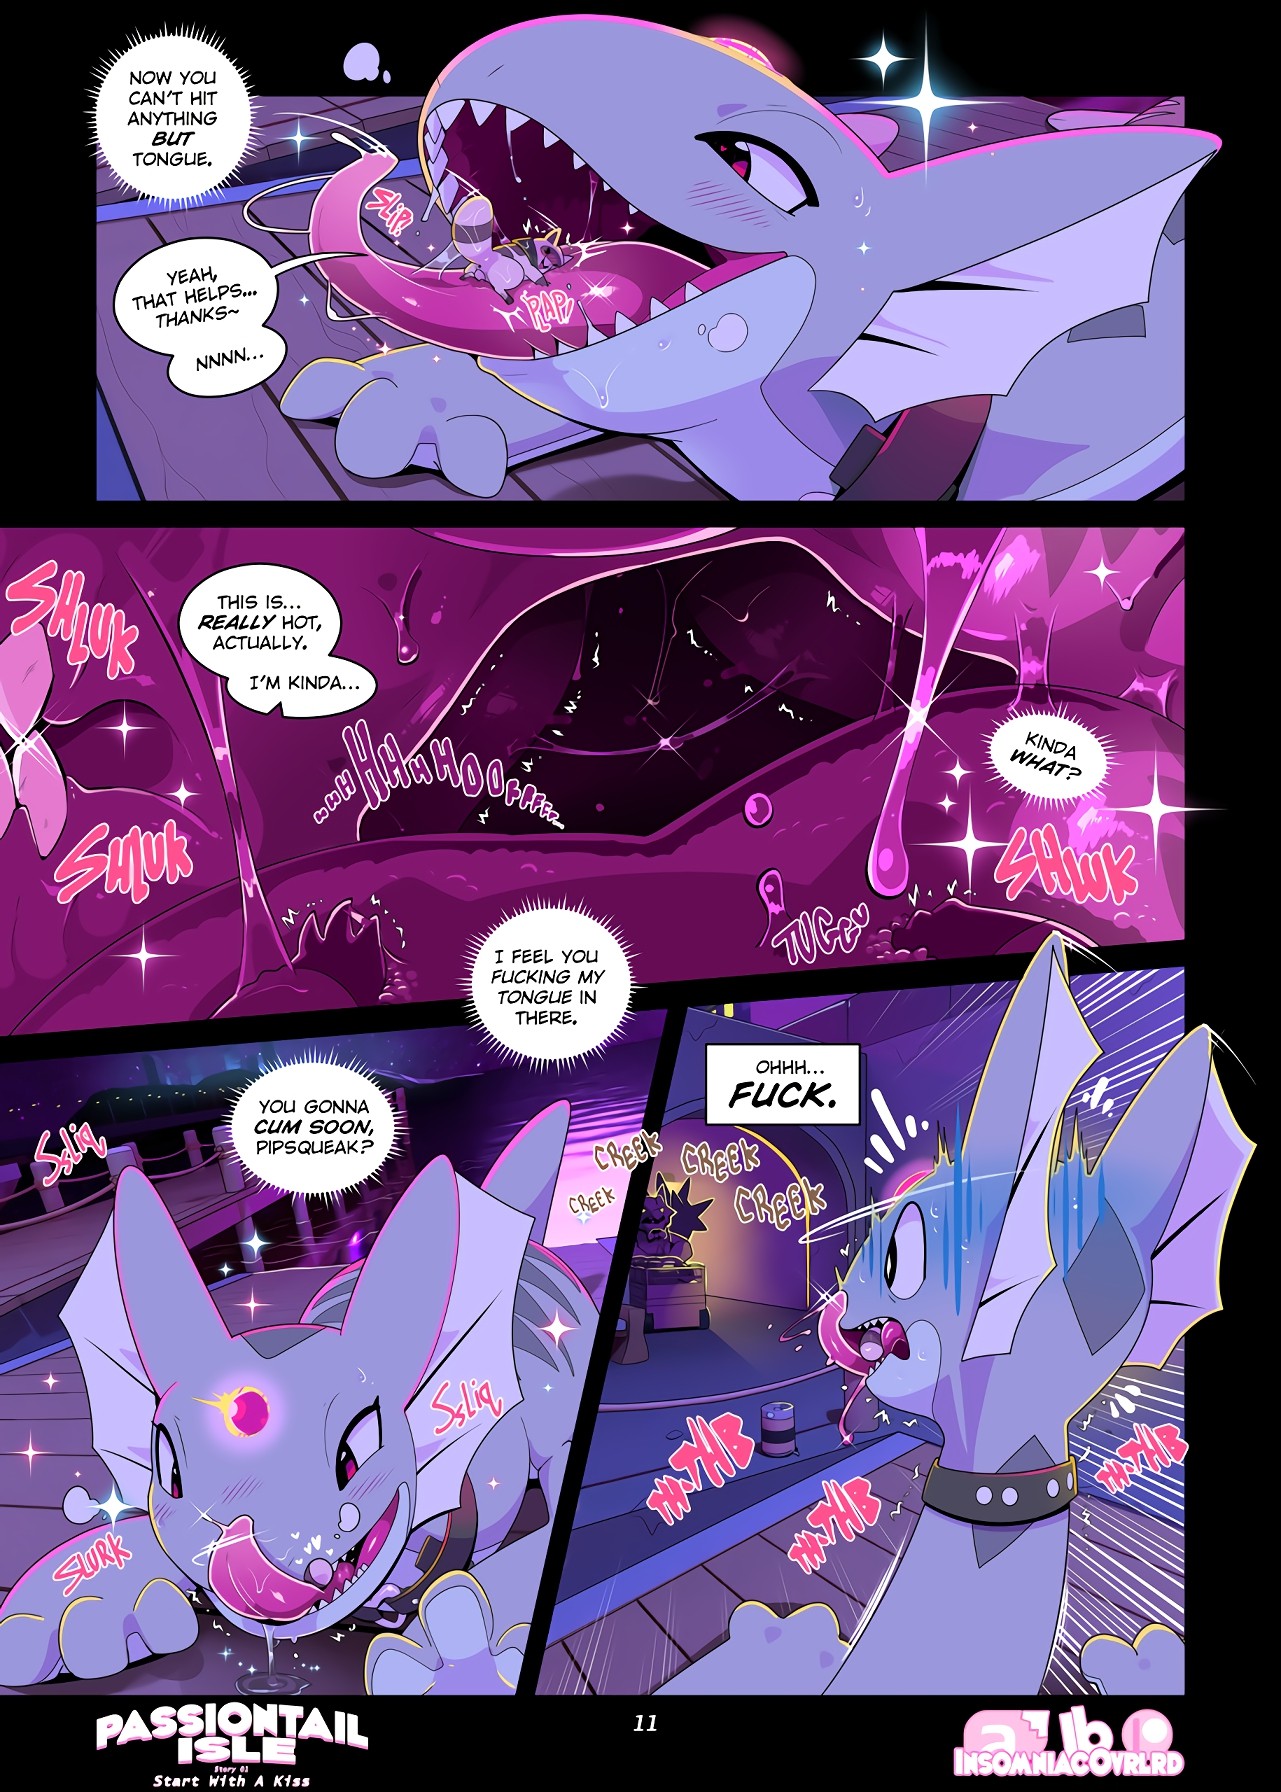 Passiontail Isle by Insomniacovrlrd porn comic picture 12